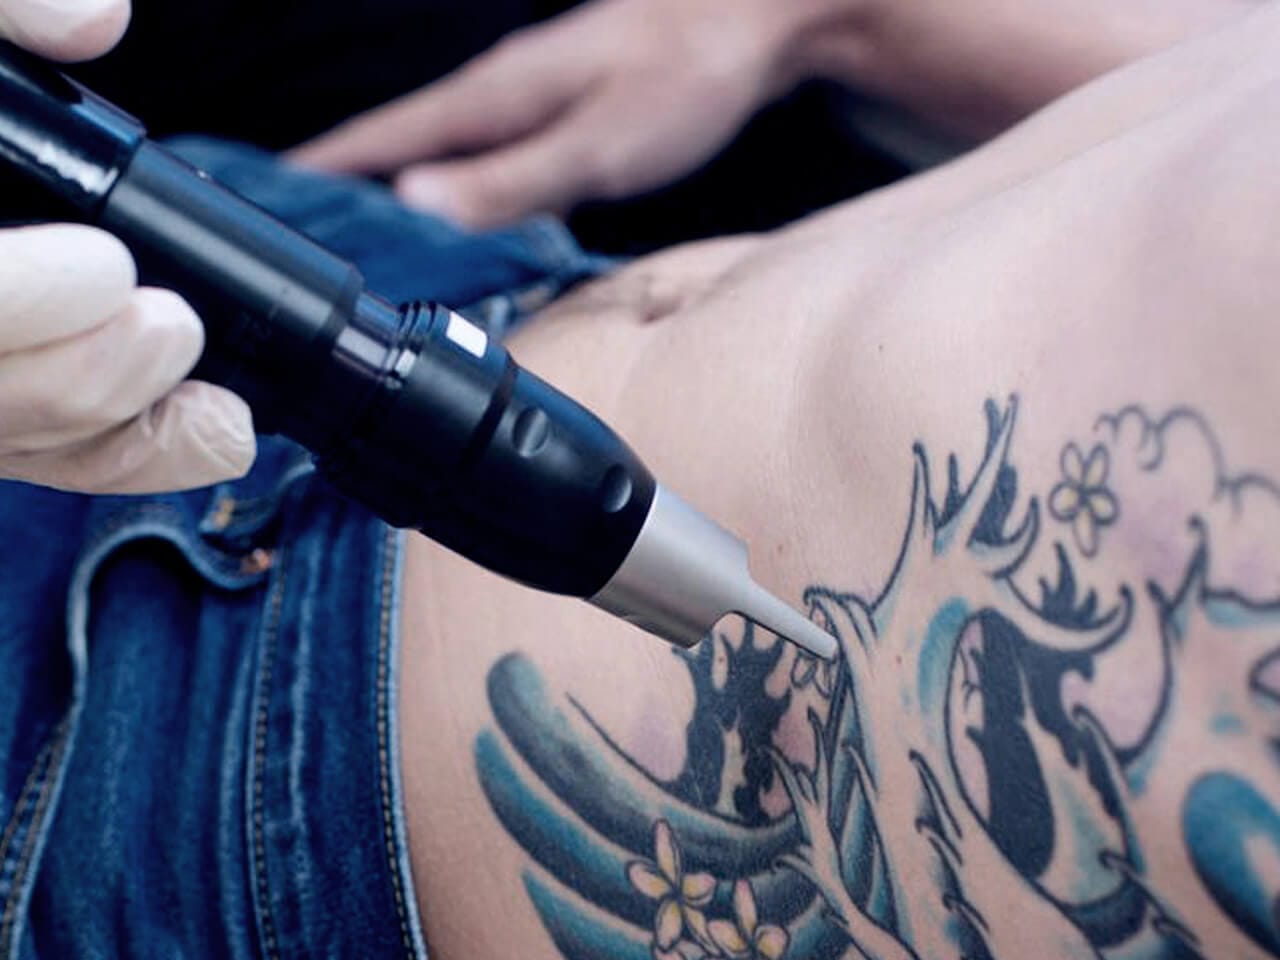 Permanent Tattoo Removal With Premier Pico Laser